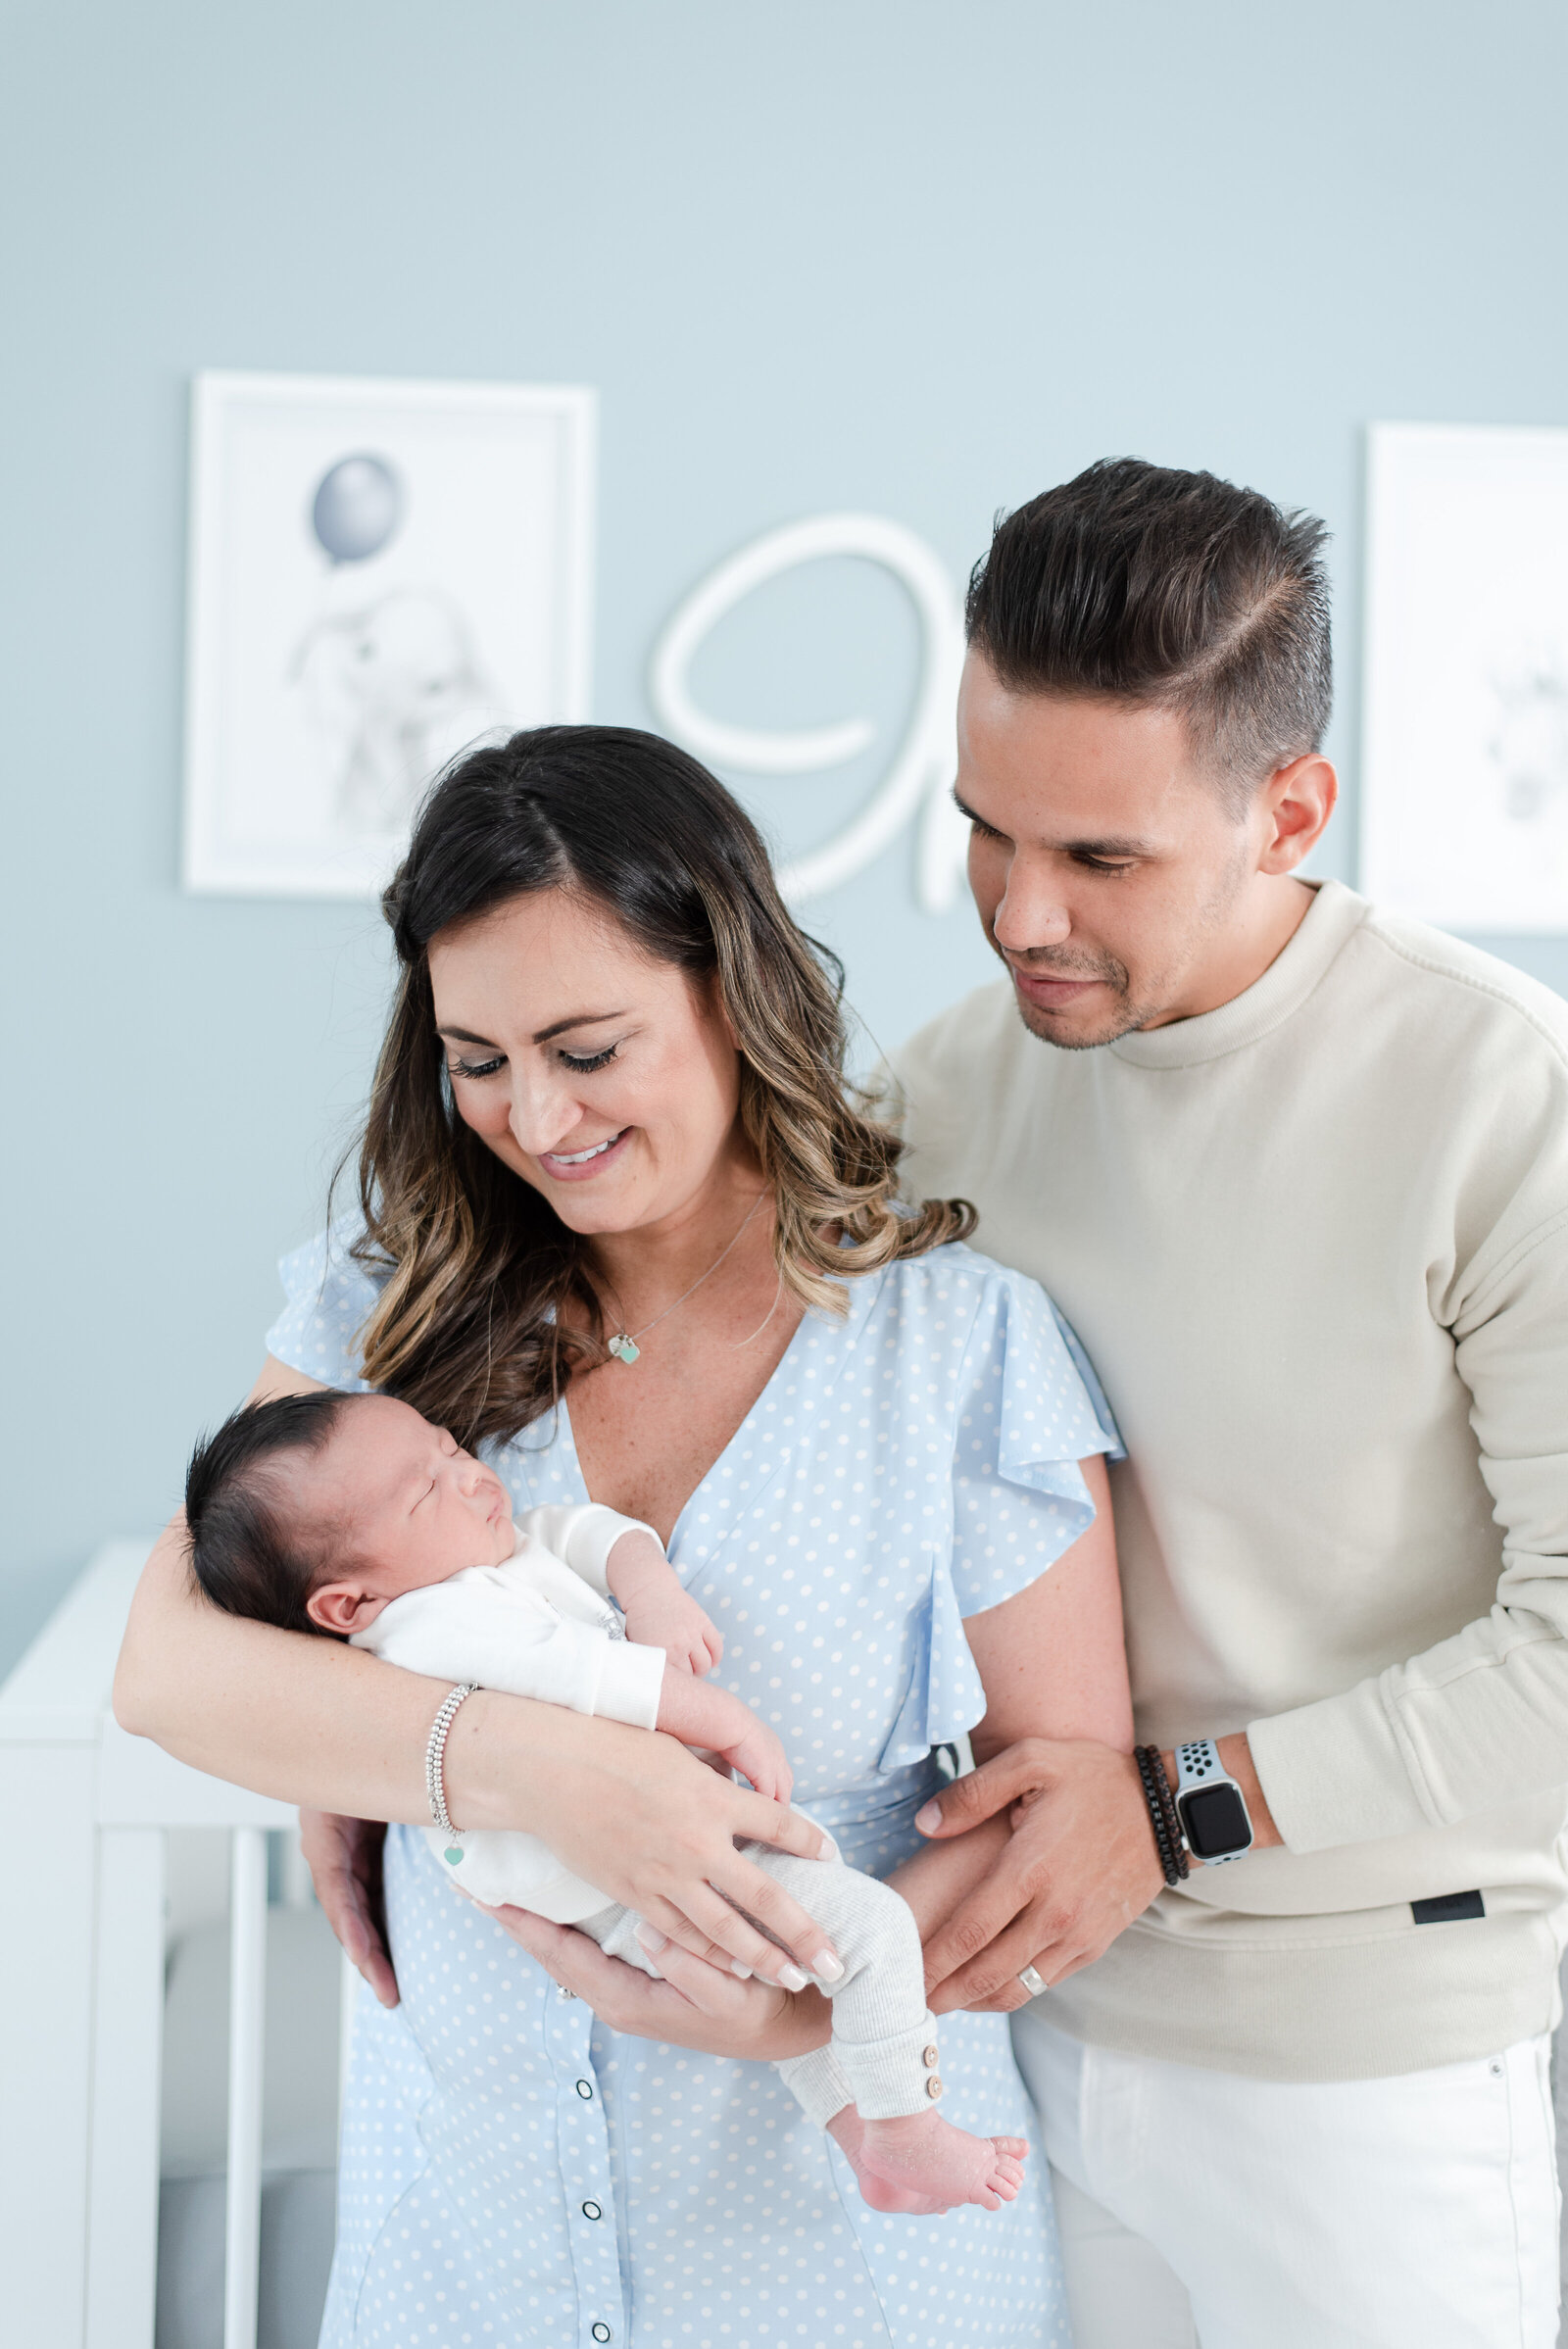 mom dad and newborn baby boy session in blue animal themed nursery in doral fl by Miami Lifestyle Photographers David and Meivys of MSP Photography